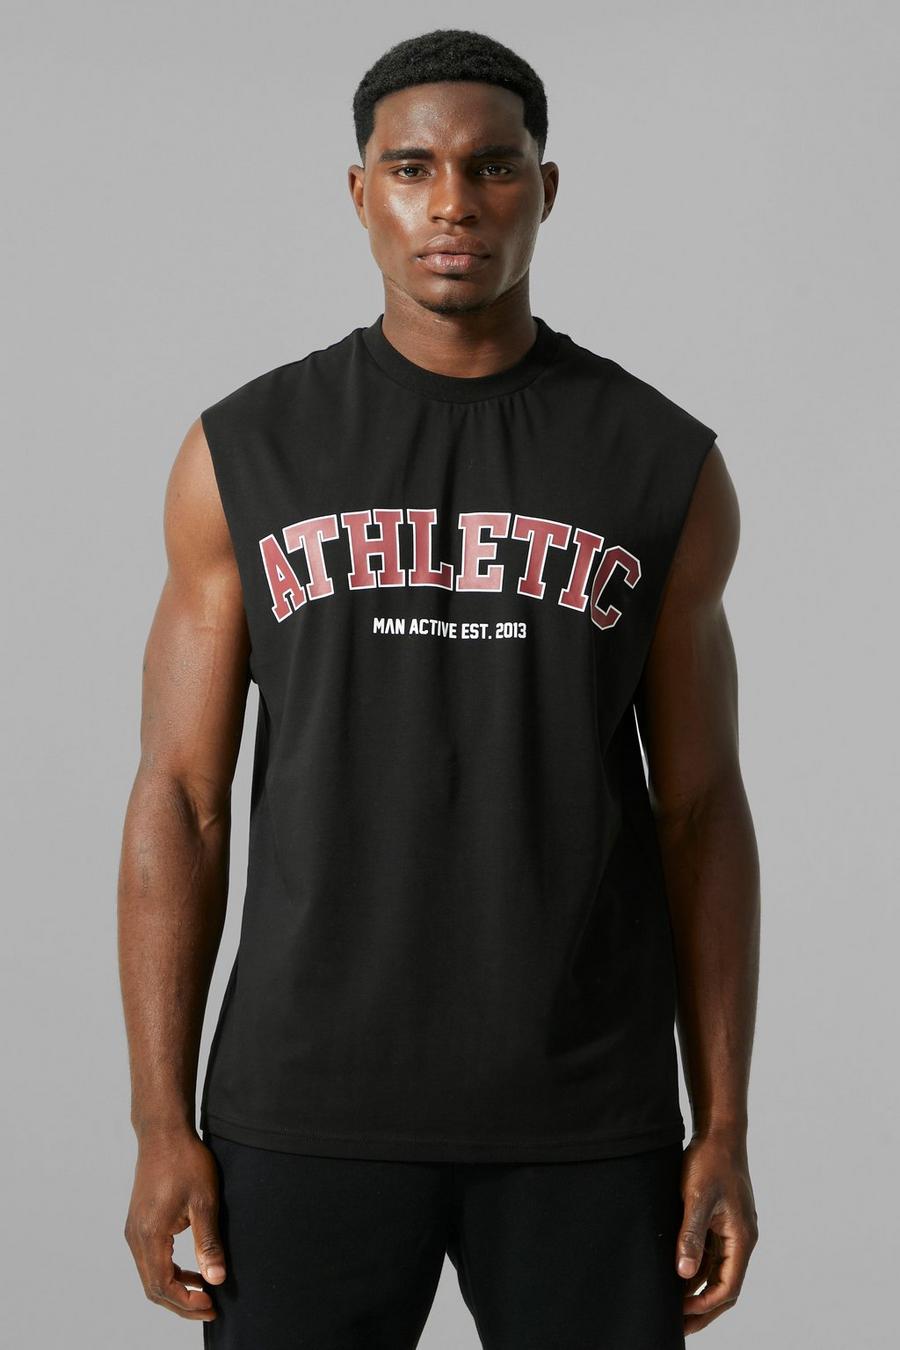 Black Man Active Fitness Athletic Tank Top